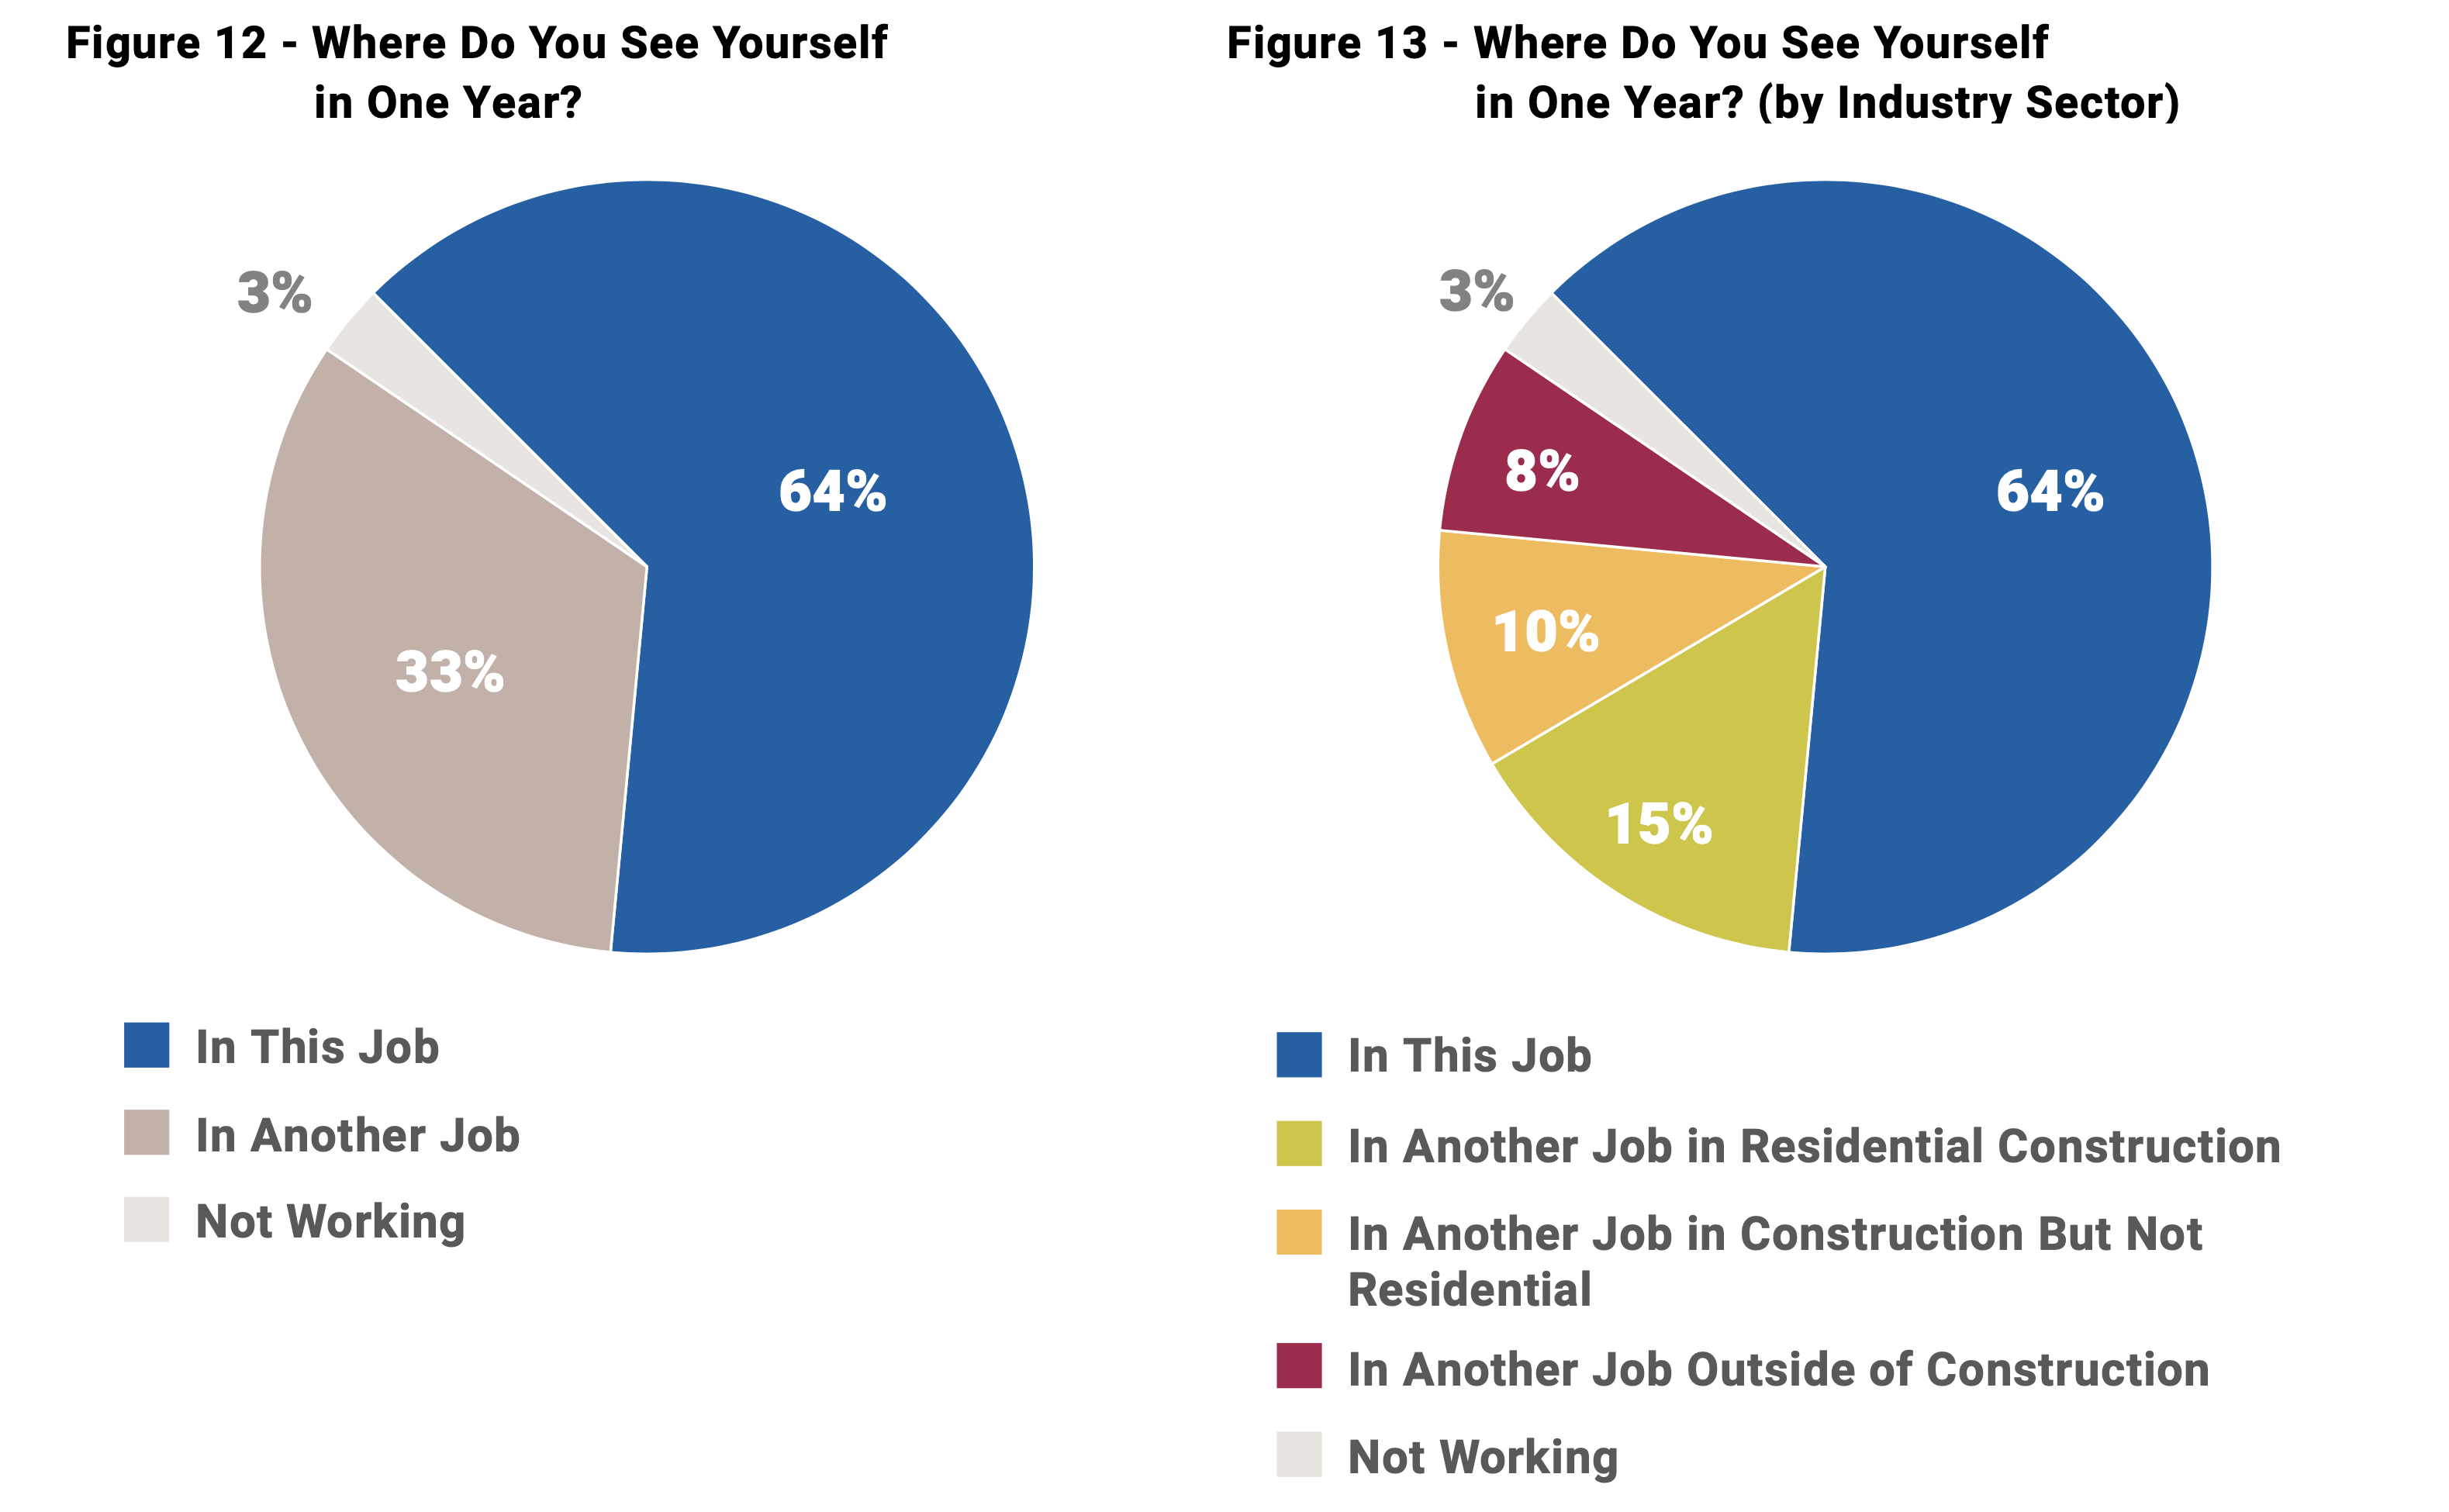 Building Talent Foundation study where do you see yourself in one year